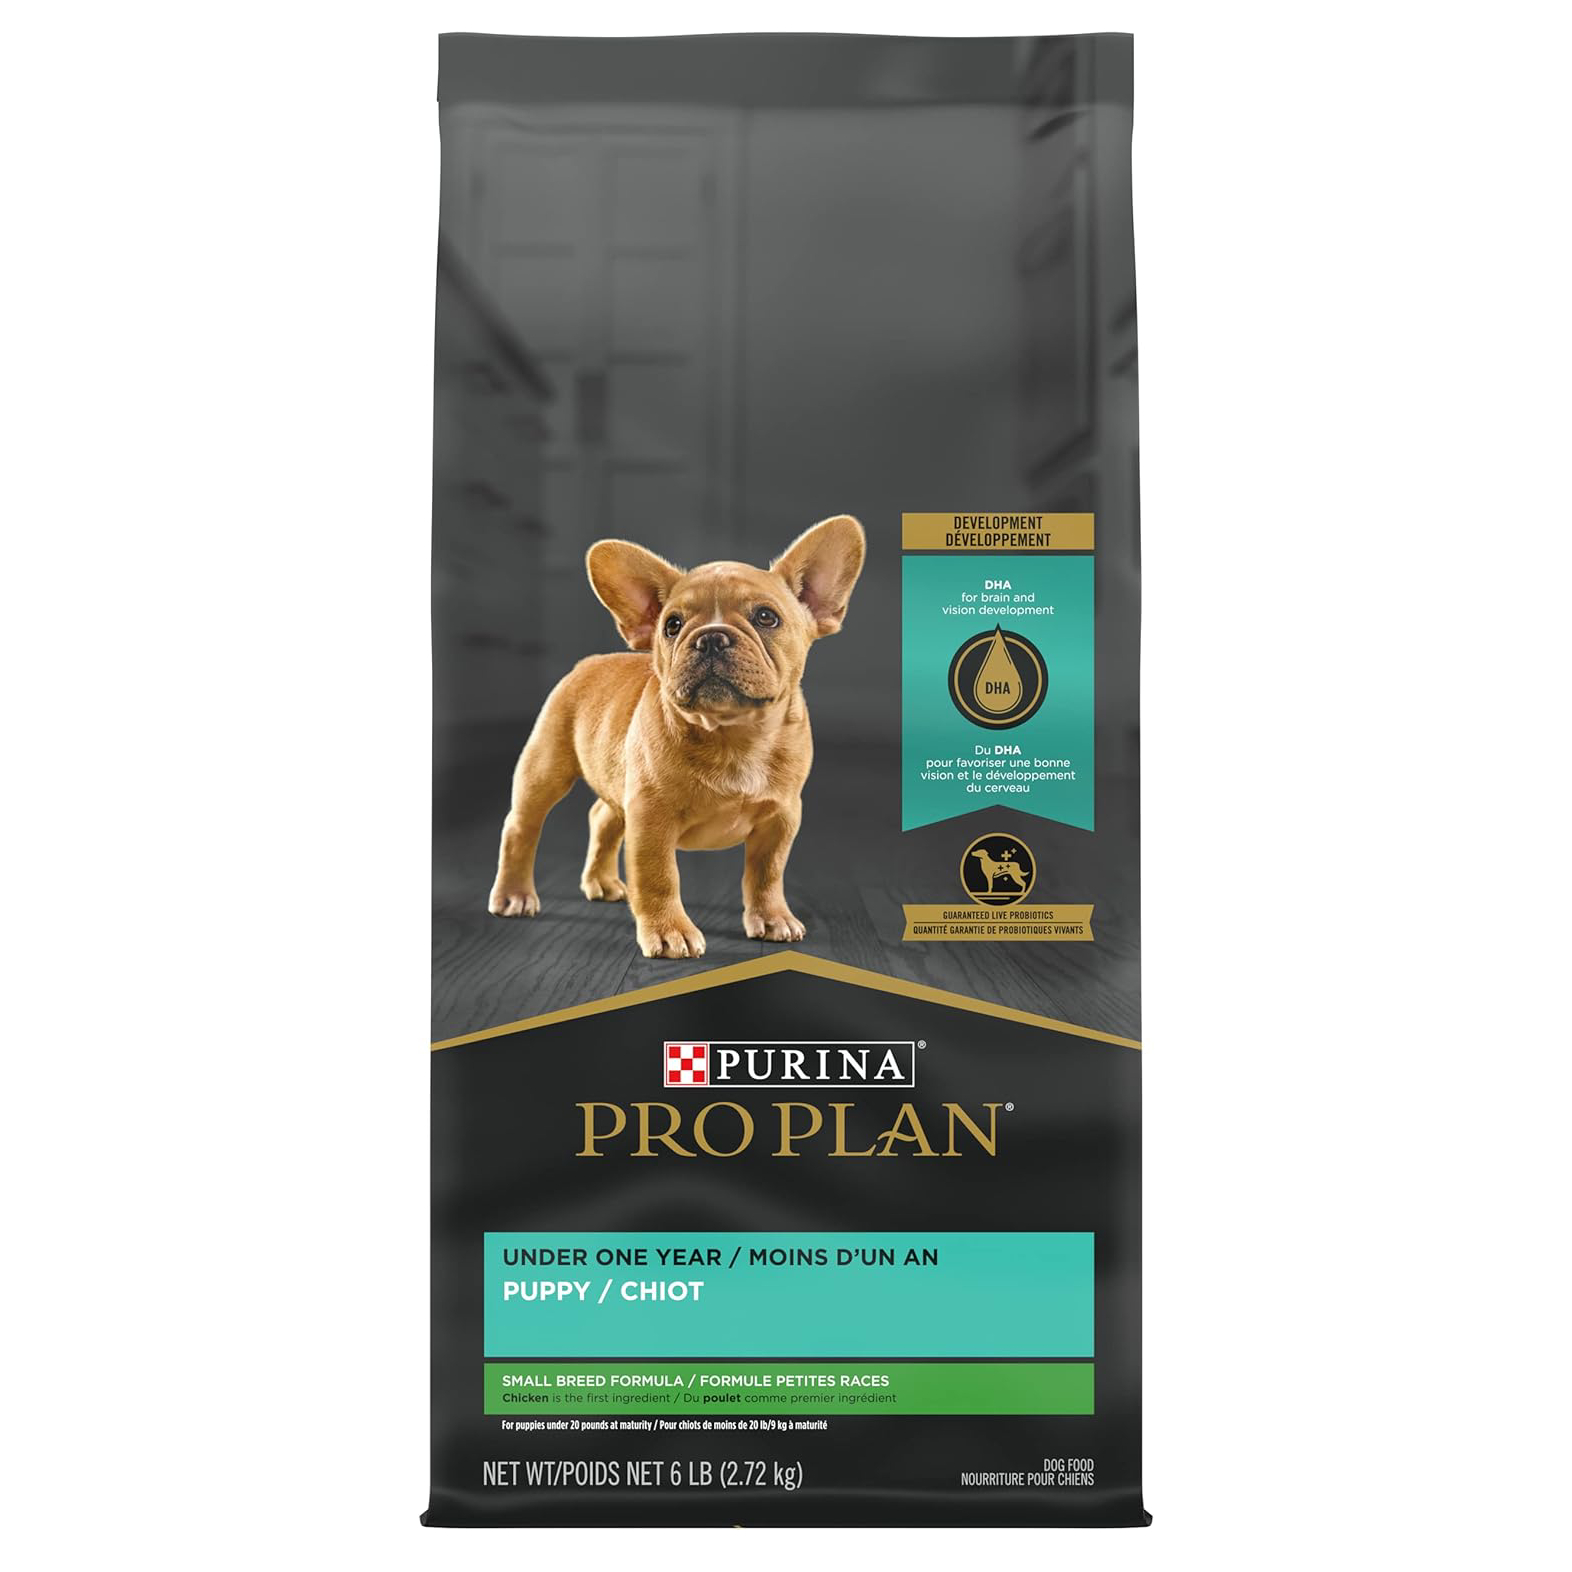 Purina Pro Plan Puppy Small Breed Chicken & Rice Dog Food